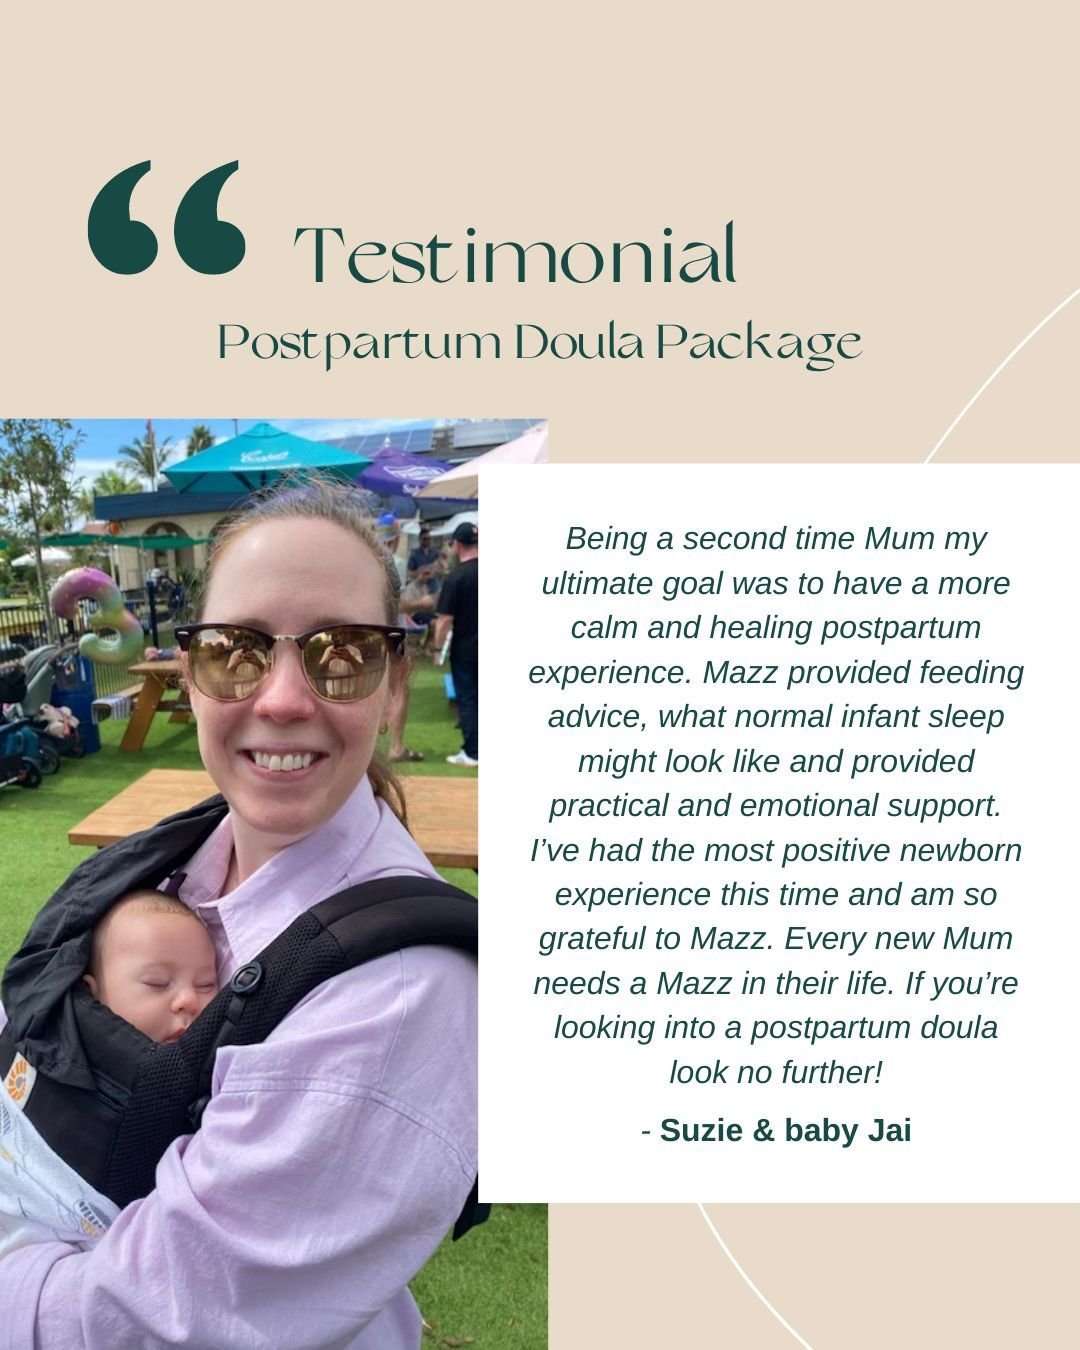 ✨️ K I N D  W O R D S ✨️⁠
Supporting a second time mum to experience a healing postpartum is unbelievably special. I'm so grateful for all of the amazing women like Suzie that I get to be alongside during such a transformative season in their lives ?